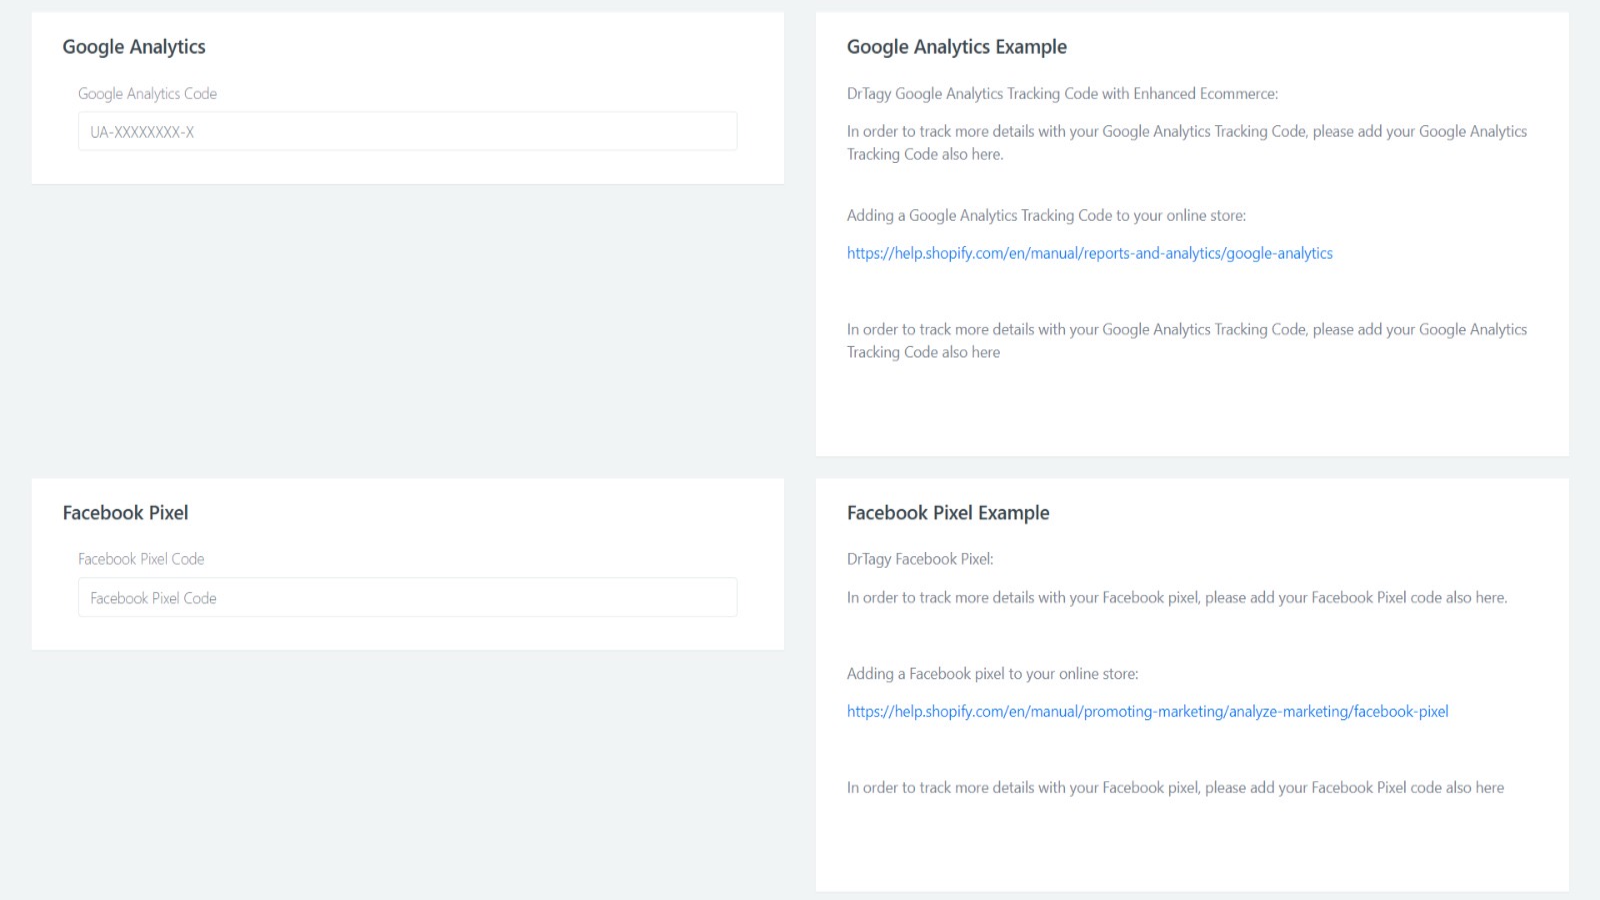 You can track Facebook Pixel & Google Analytics with more detail